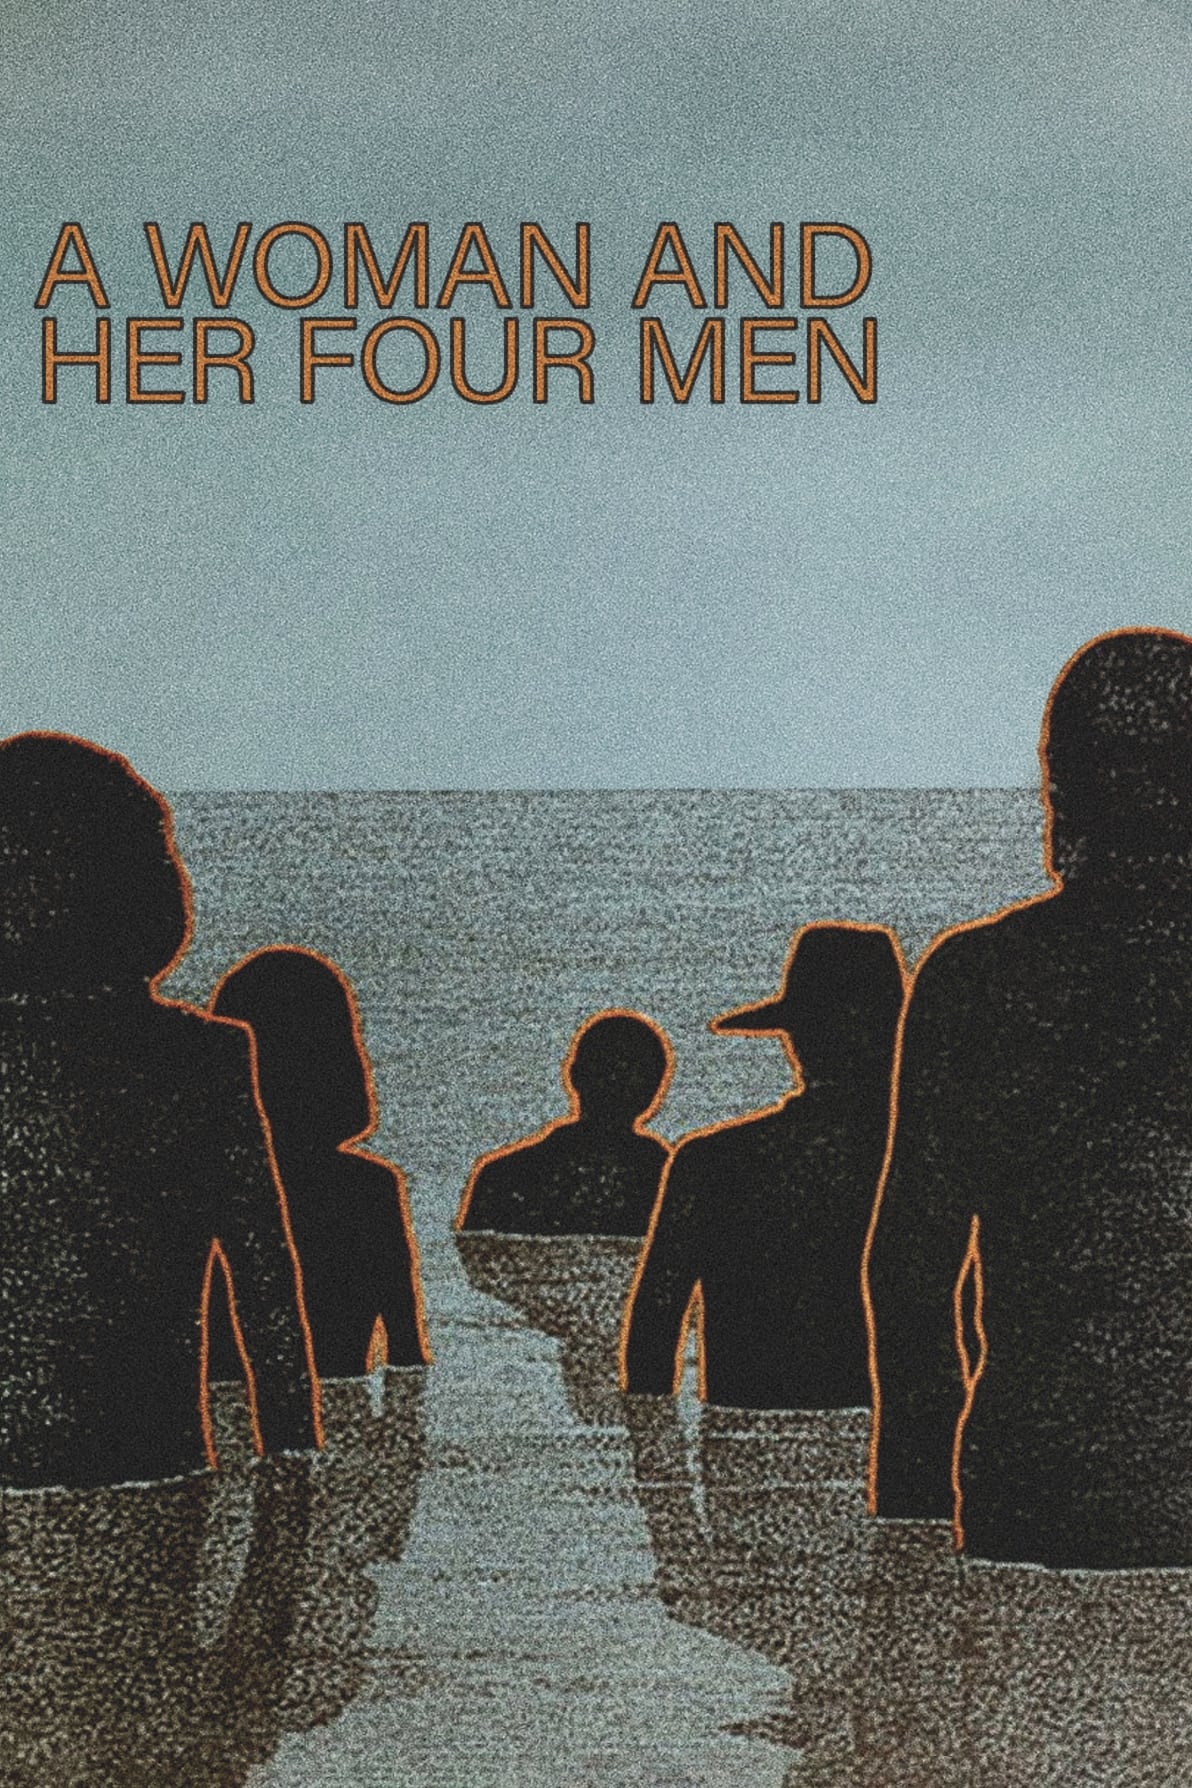 A Woman and Her Four Men